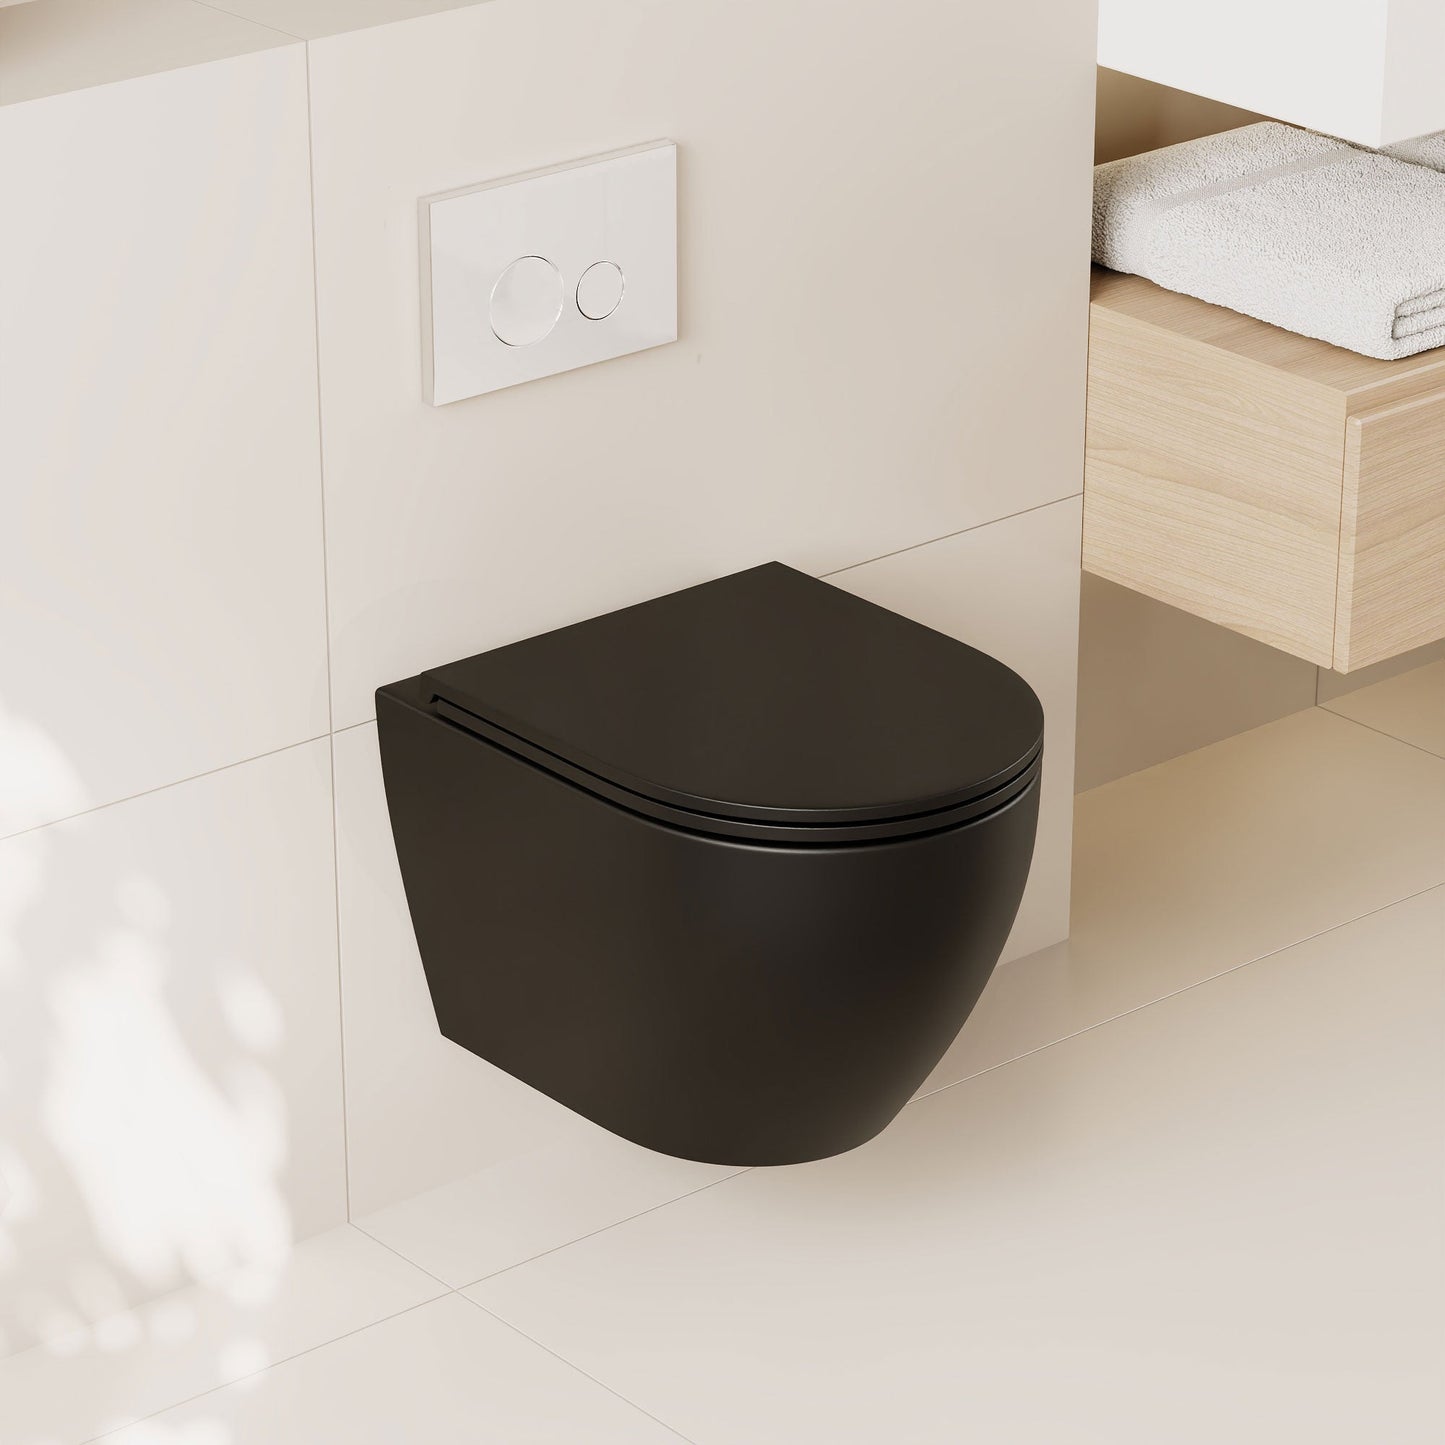 DeerValley Liberty 1.1/1.6GPF Siphon Flushing Elongated Black Wall-Mounted Toilet With Concealed In-Wall Toilet Tank